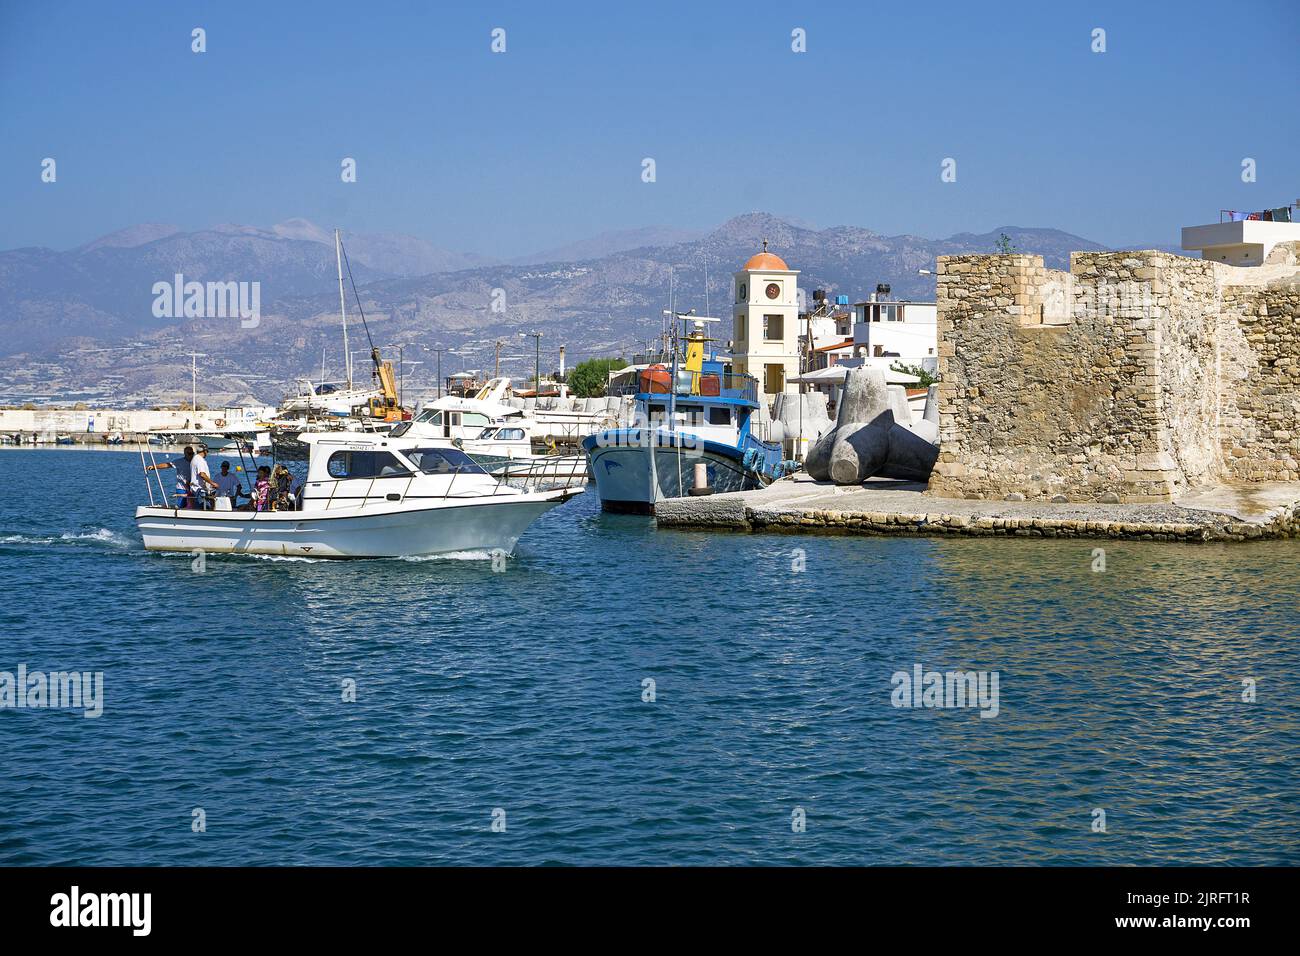 Fishing boats in the harbour of Ierapetra, old venetian Fortress, Ierapetra is the most southern city of Greece, Crete, Greece, Europe Stock Photo